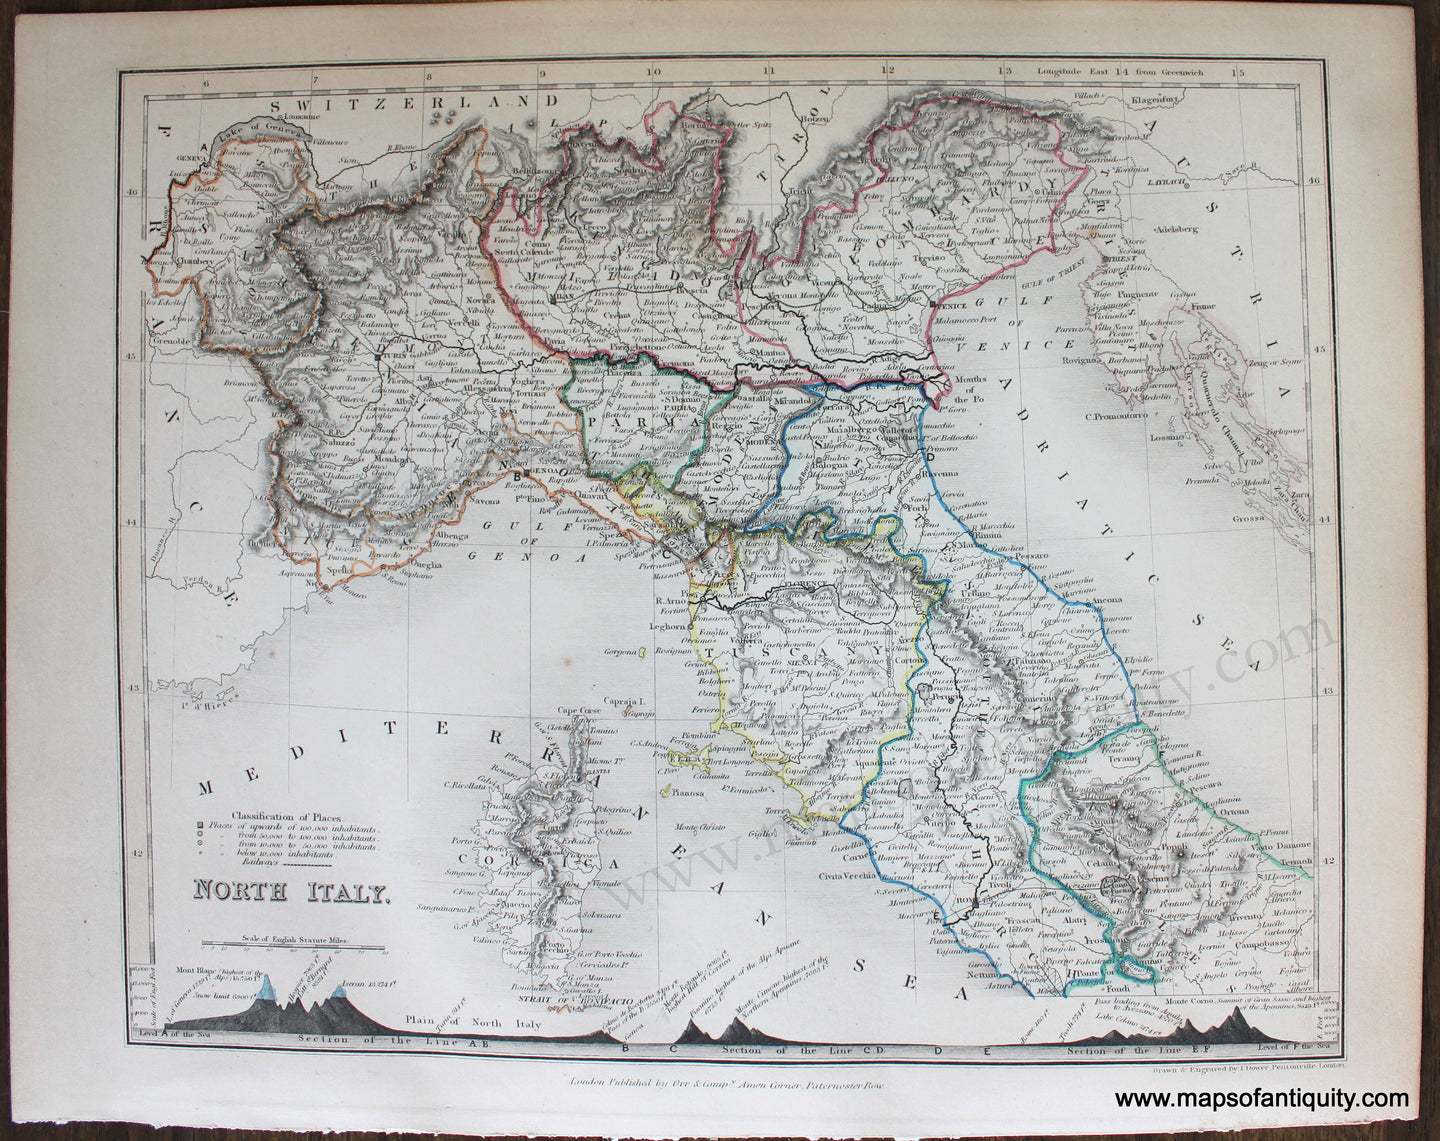 Genuine-Antique-Map-North-Italy-Europe-Italy-1850-Petermann-/-Orr-/-Dower-Maps-Of-Antiquity-1800s-19th-century